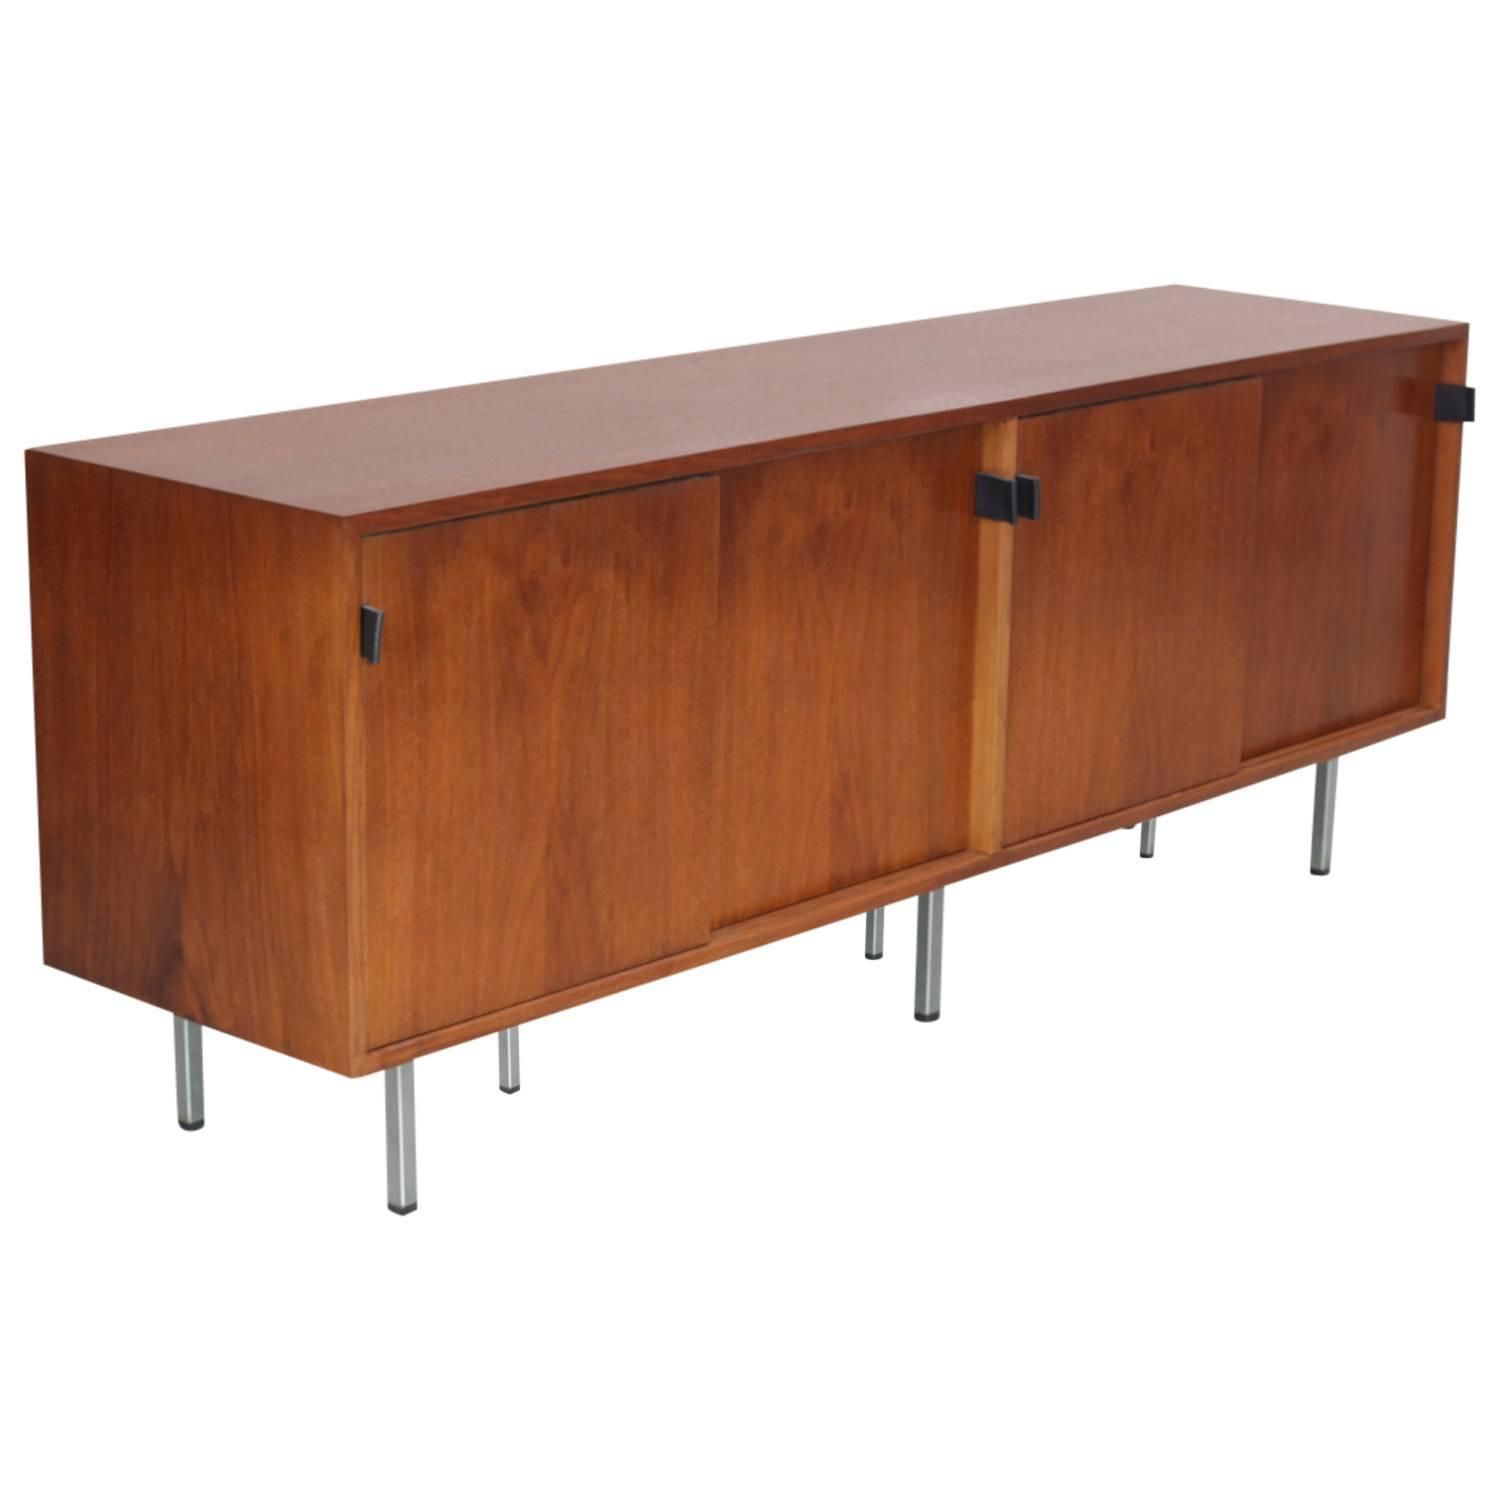 Florence Knoll Credenza Sideboard Walnut With Leather Pulls In Retro Holistic Credenzas (View 3 of 30)